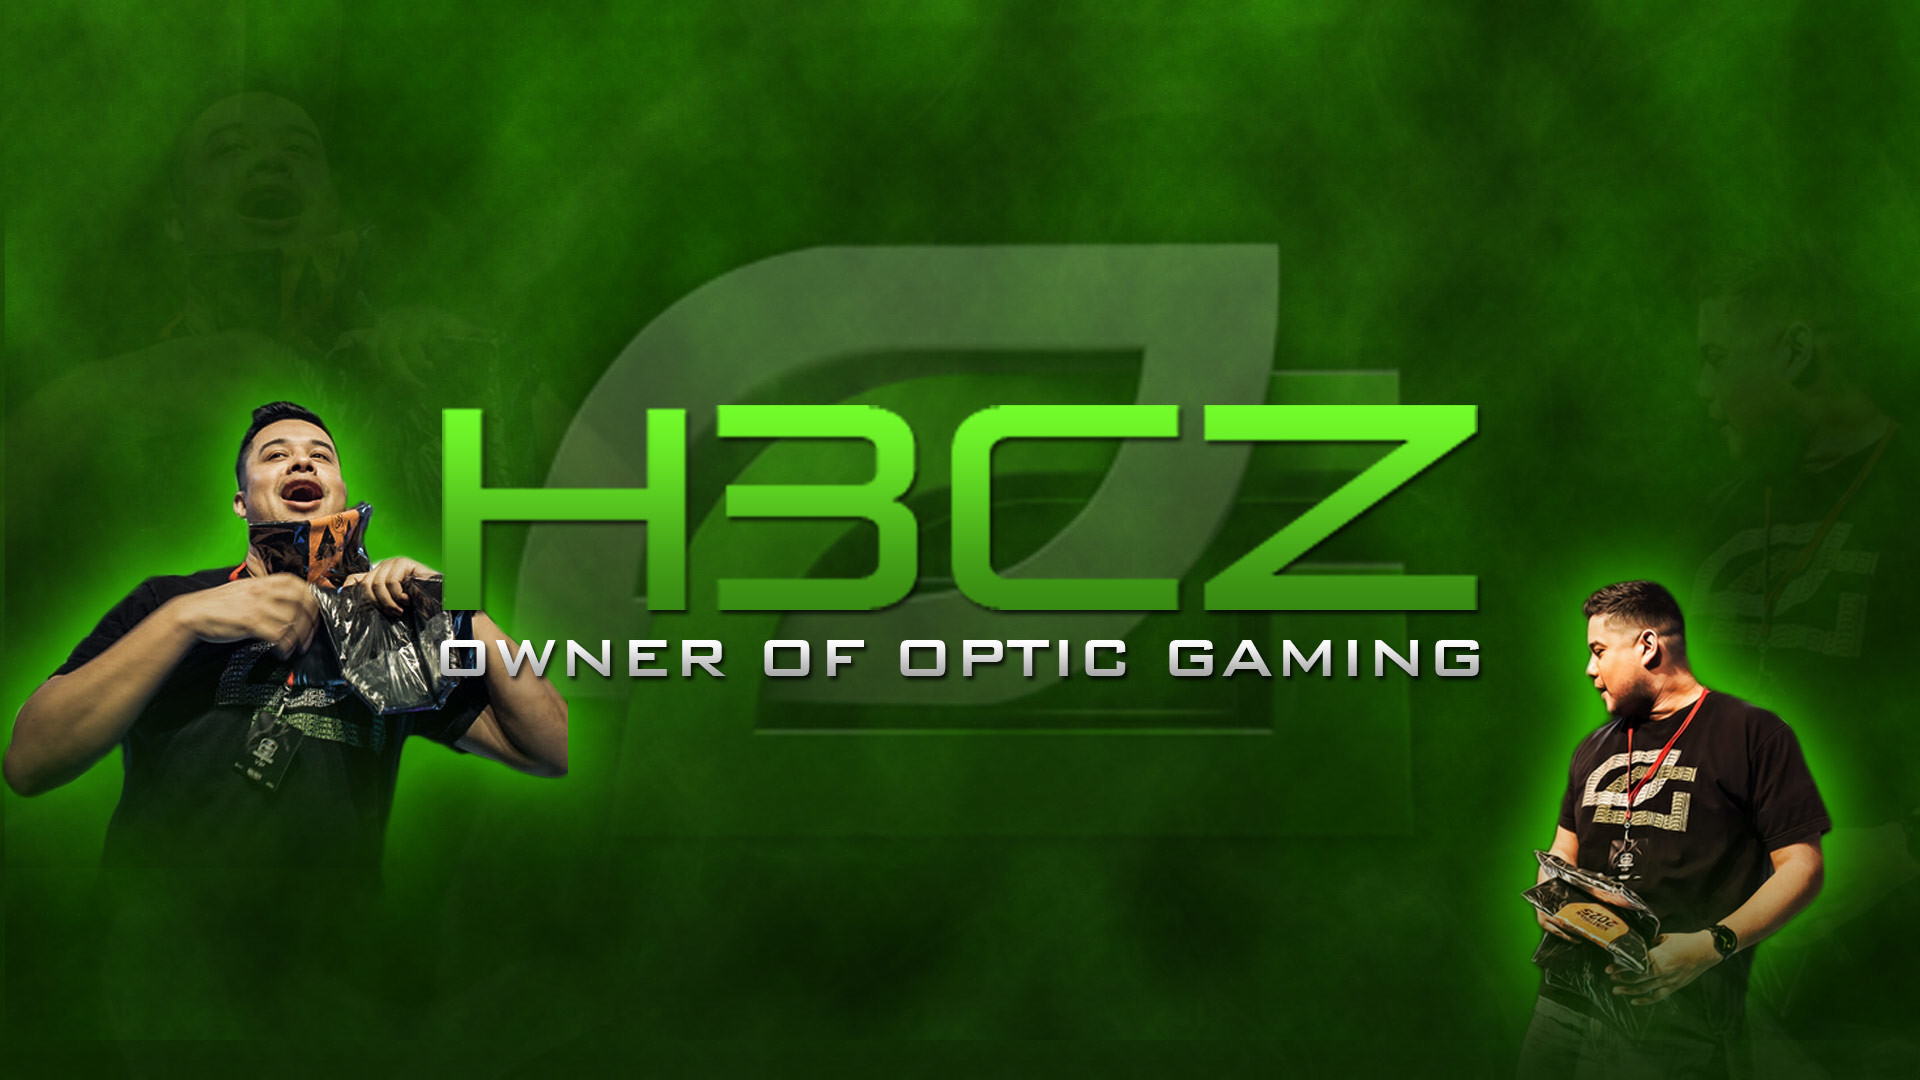 1920x1080 Optic gaming roster photo wallpaper.